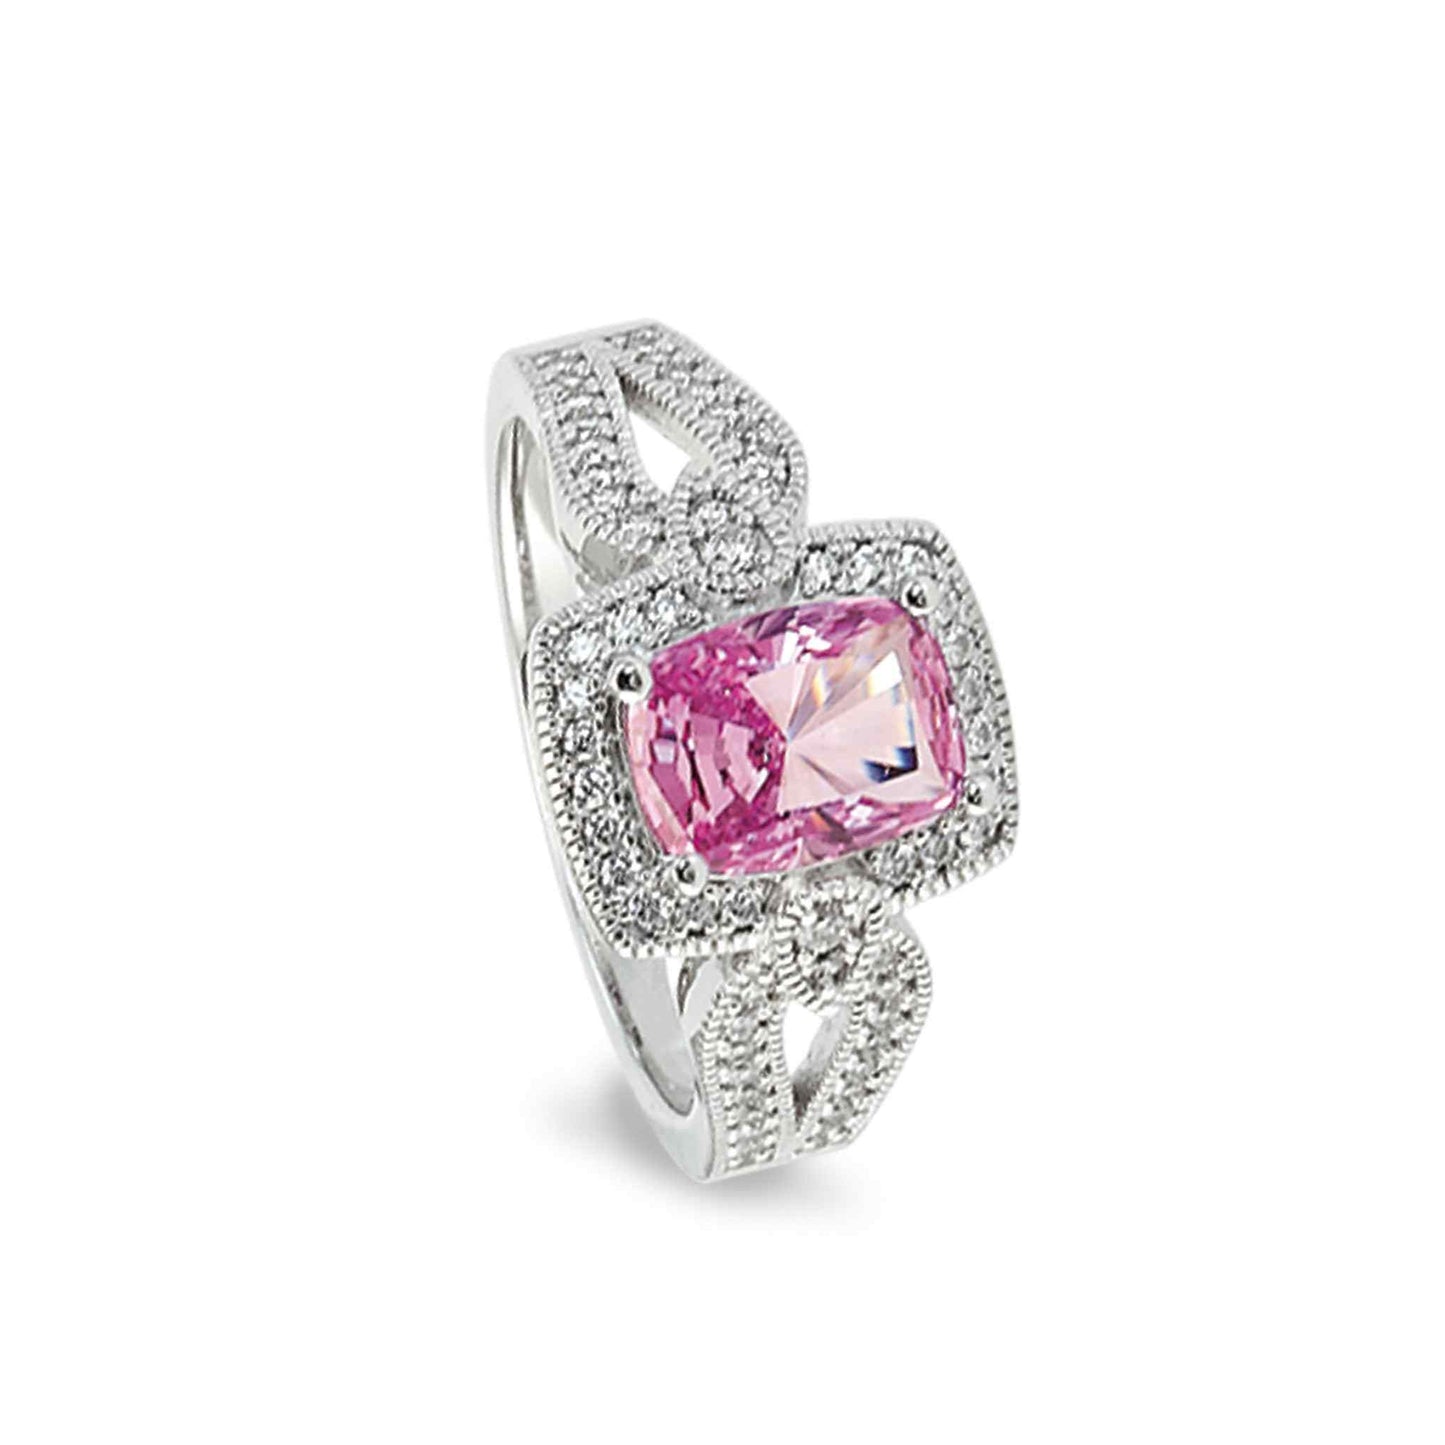 A ring with simulated pink ruby and simulated diamonds displayed on a neutral white background.